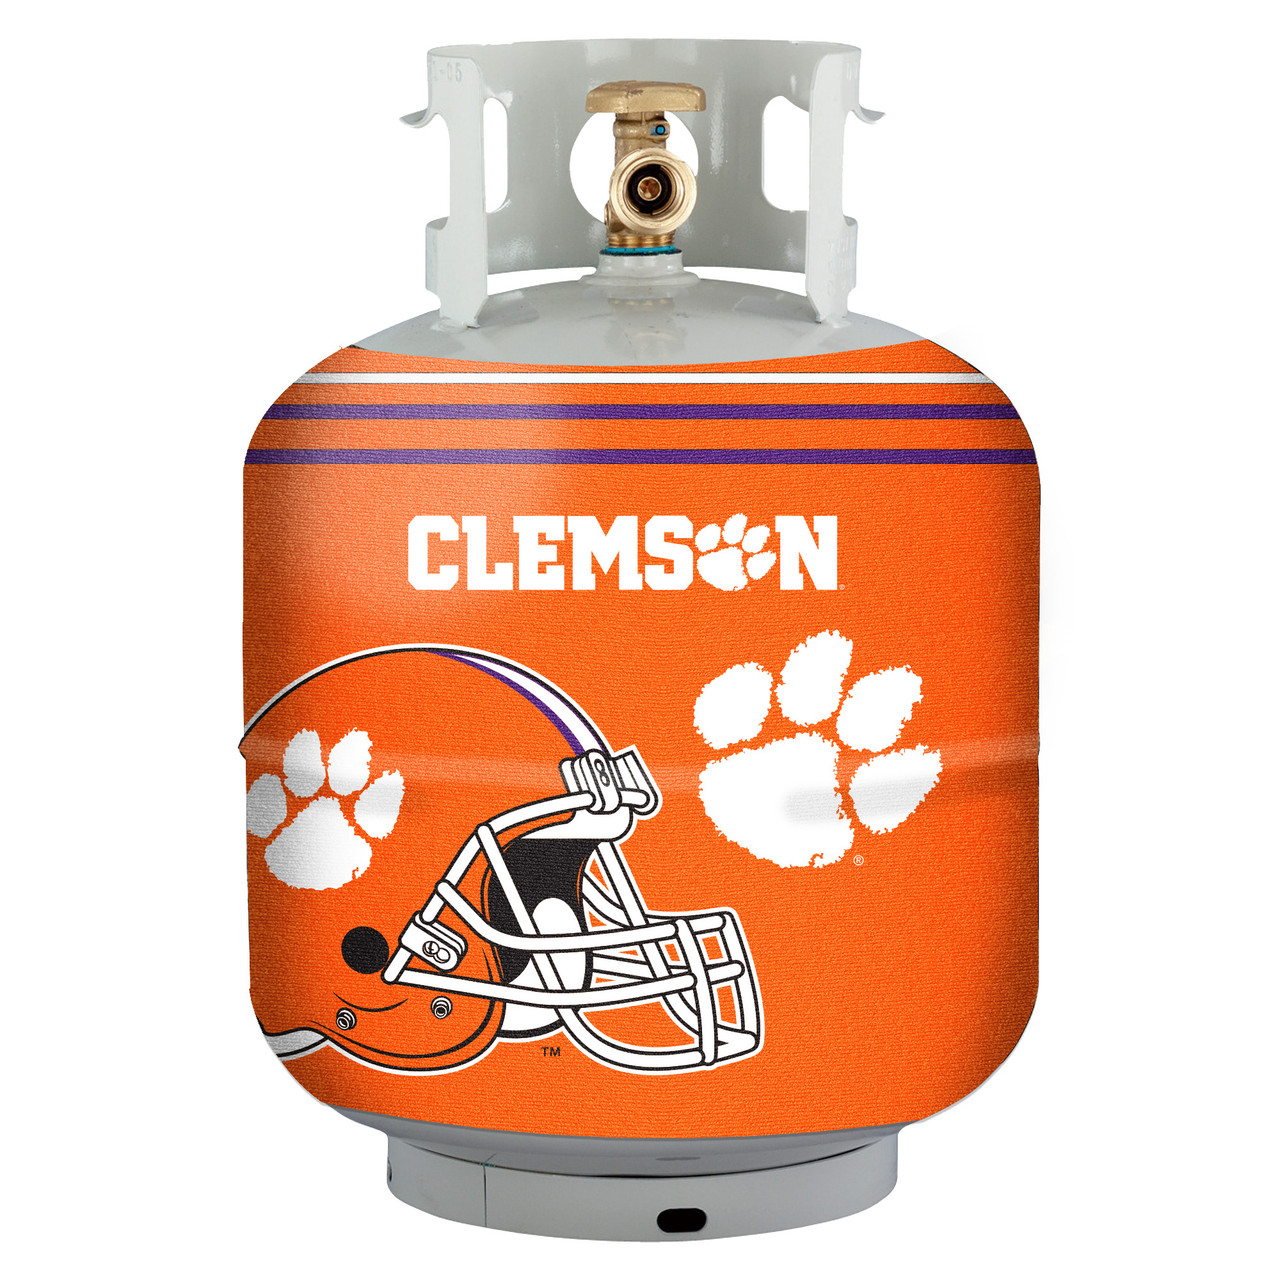 Clemson Propane Tank Cover-5 Gallon Water Cooler Cover-Garbage Can Cover